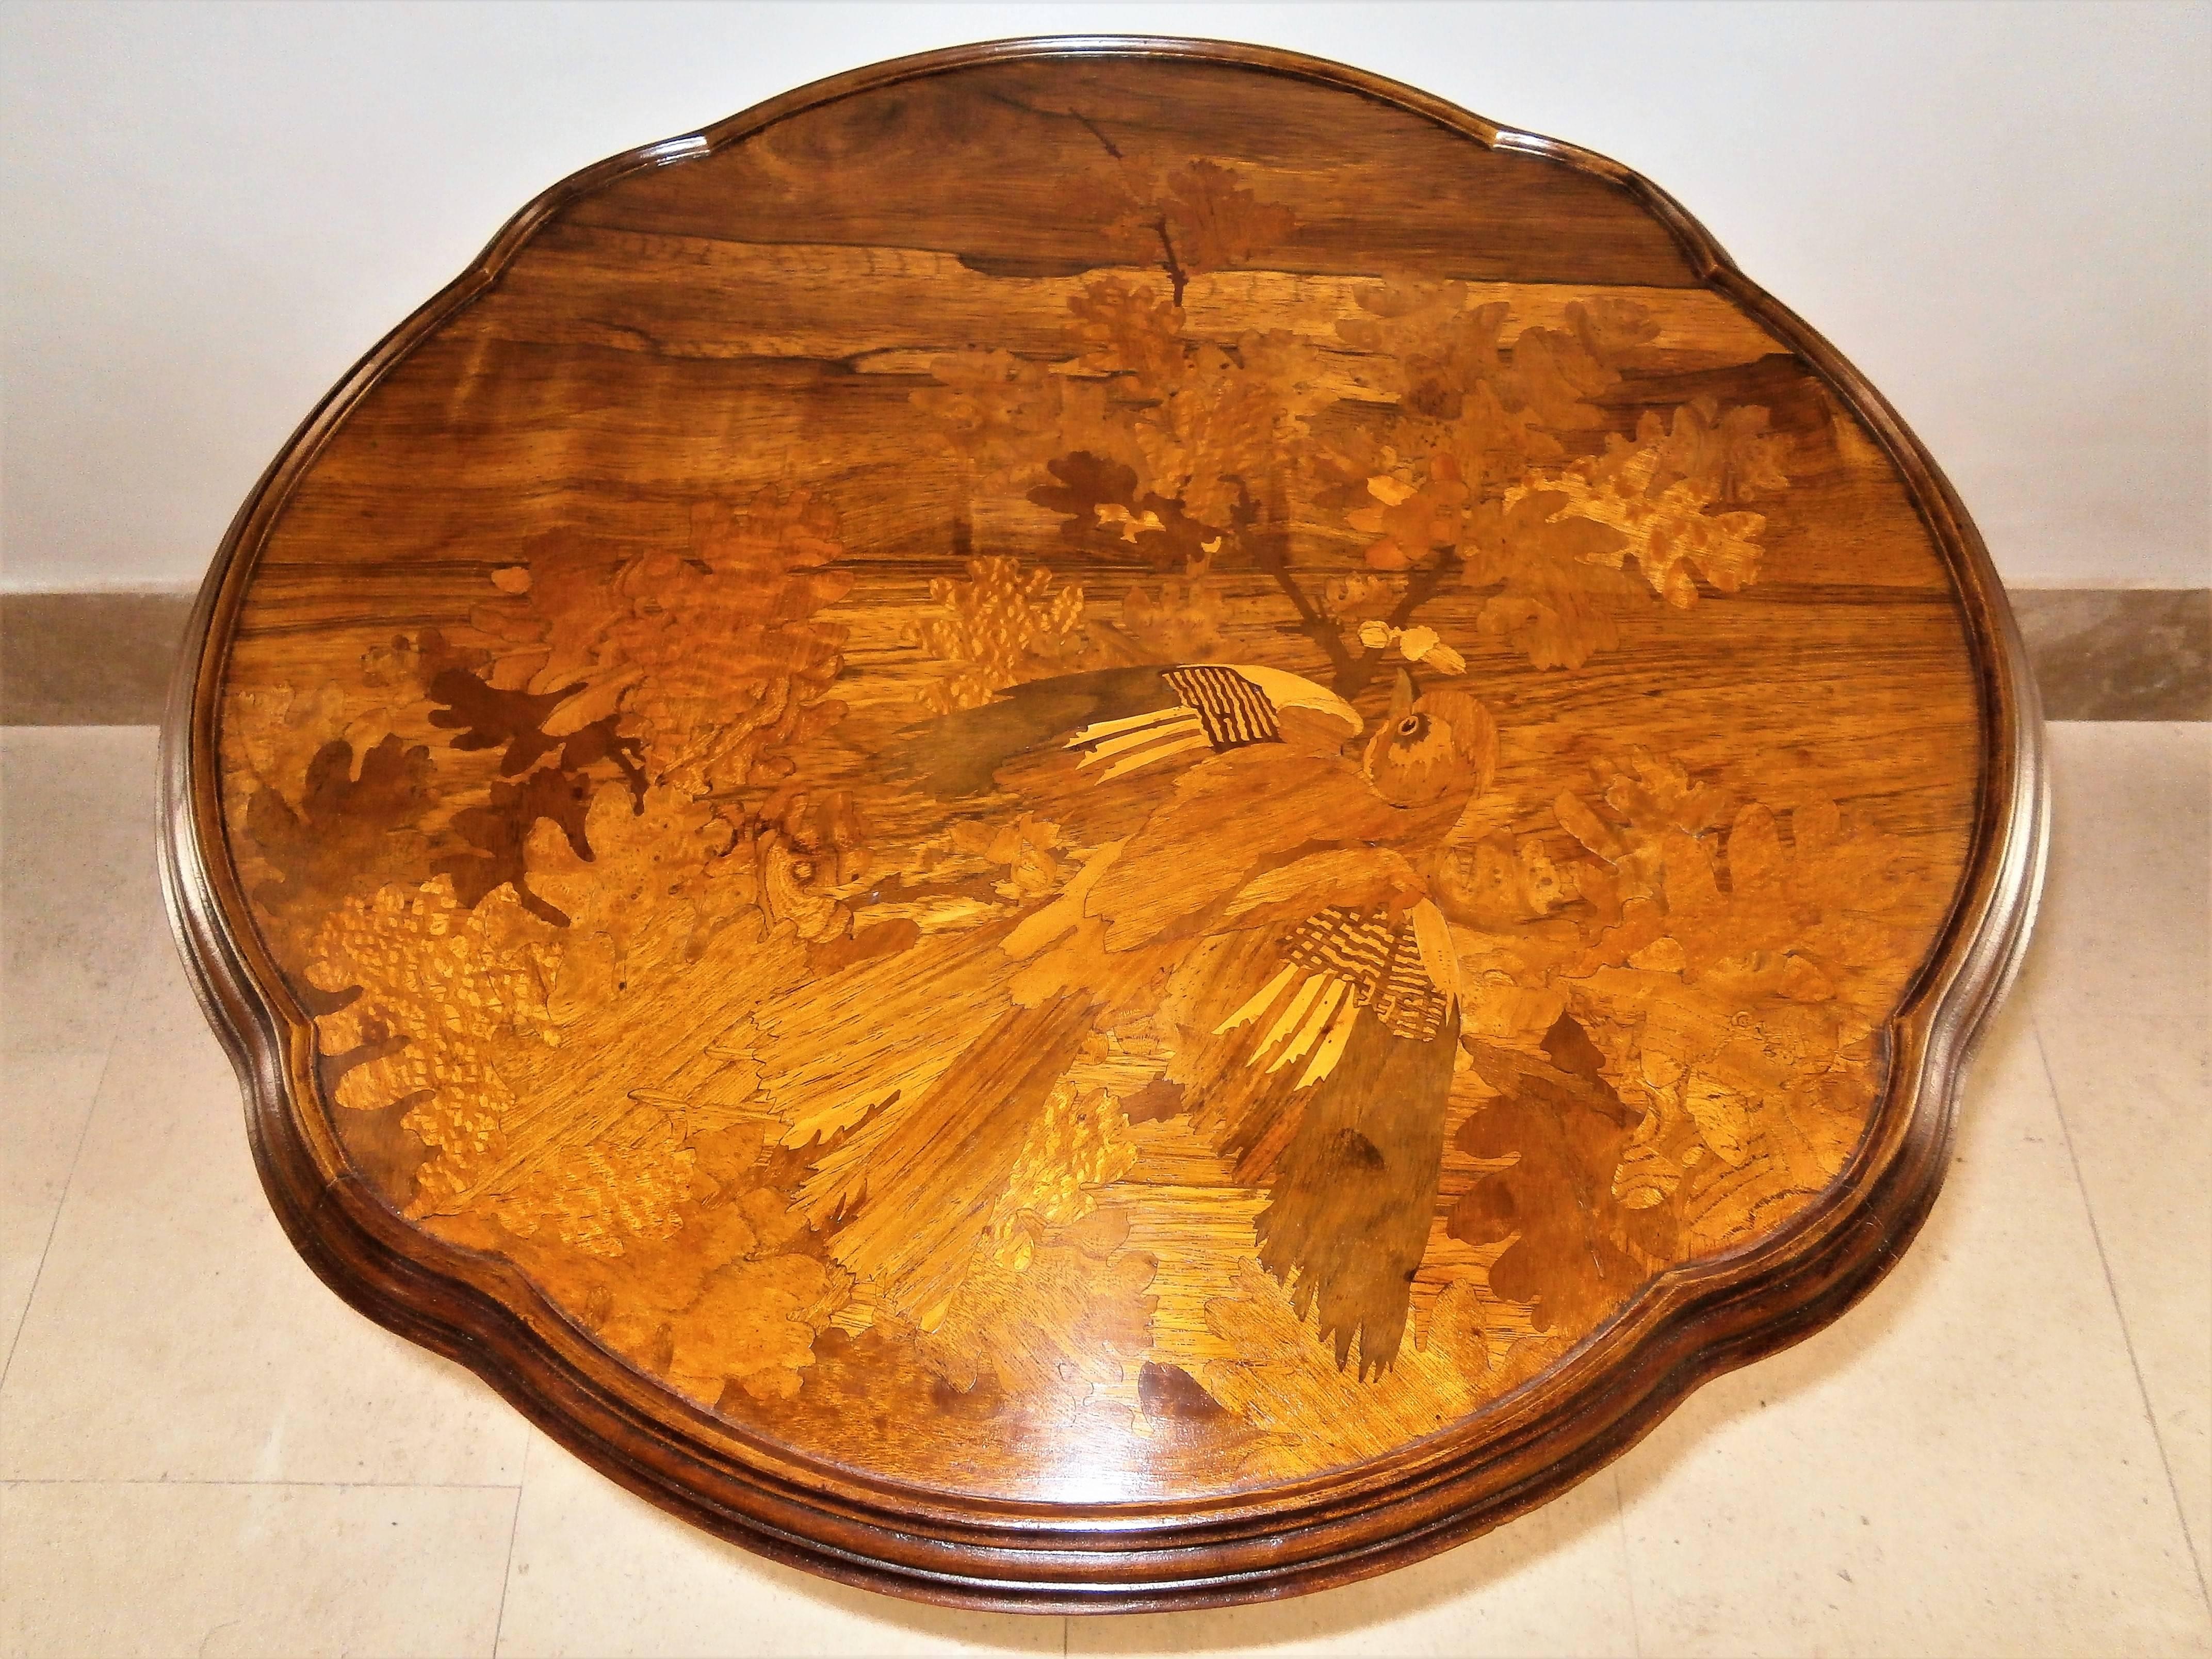 Stunning Art Nouveau pair of marquetry tables signed by Gallé, France, 1900s
In walnut and beech wood. Each table is signed in marquetry. 

In an excellent antique condition, gorgeous floral and birds decoration and contrasts. Representing a